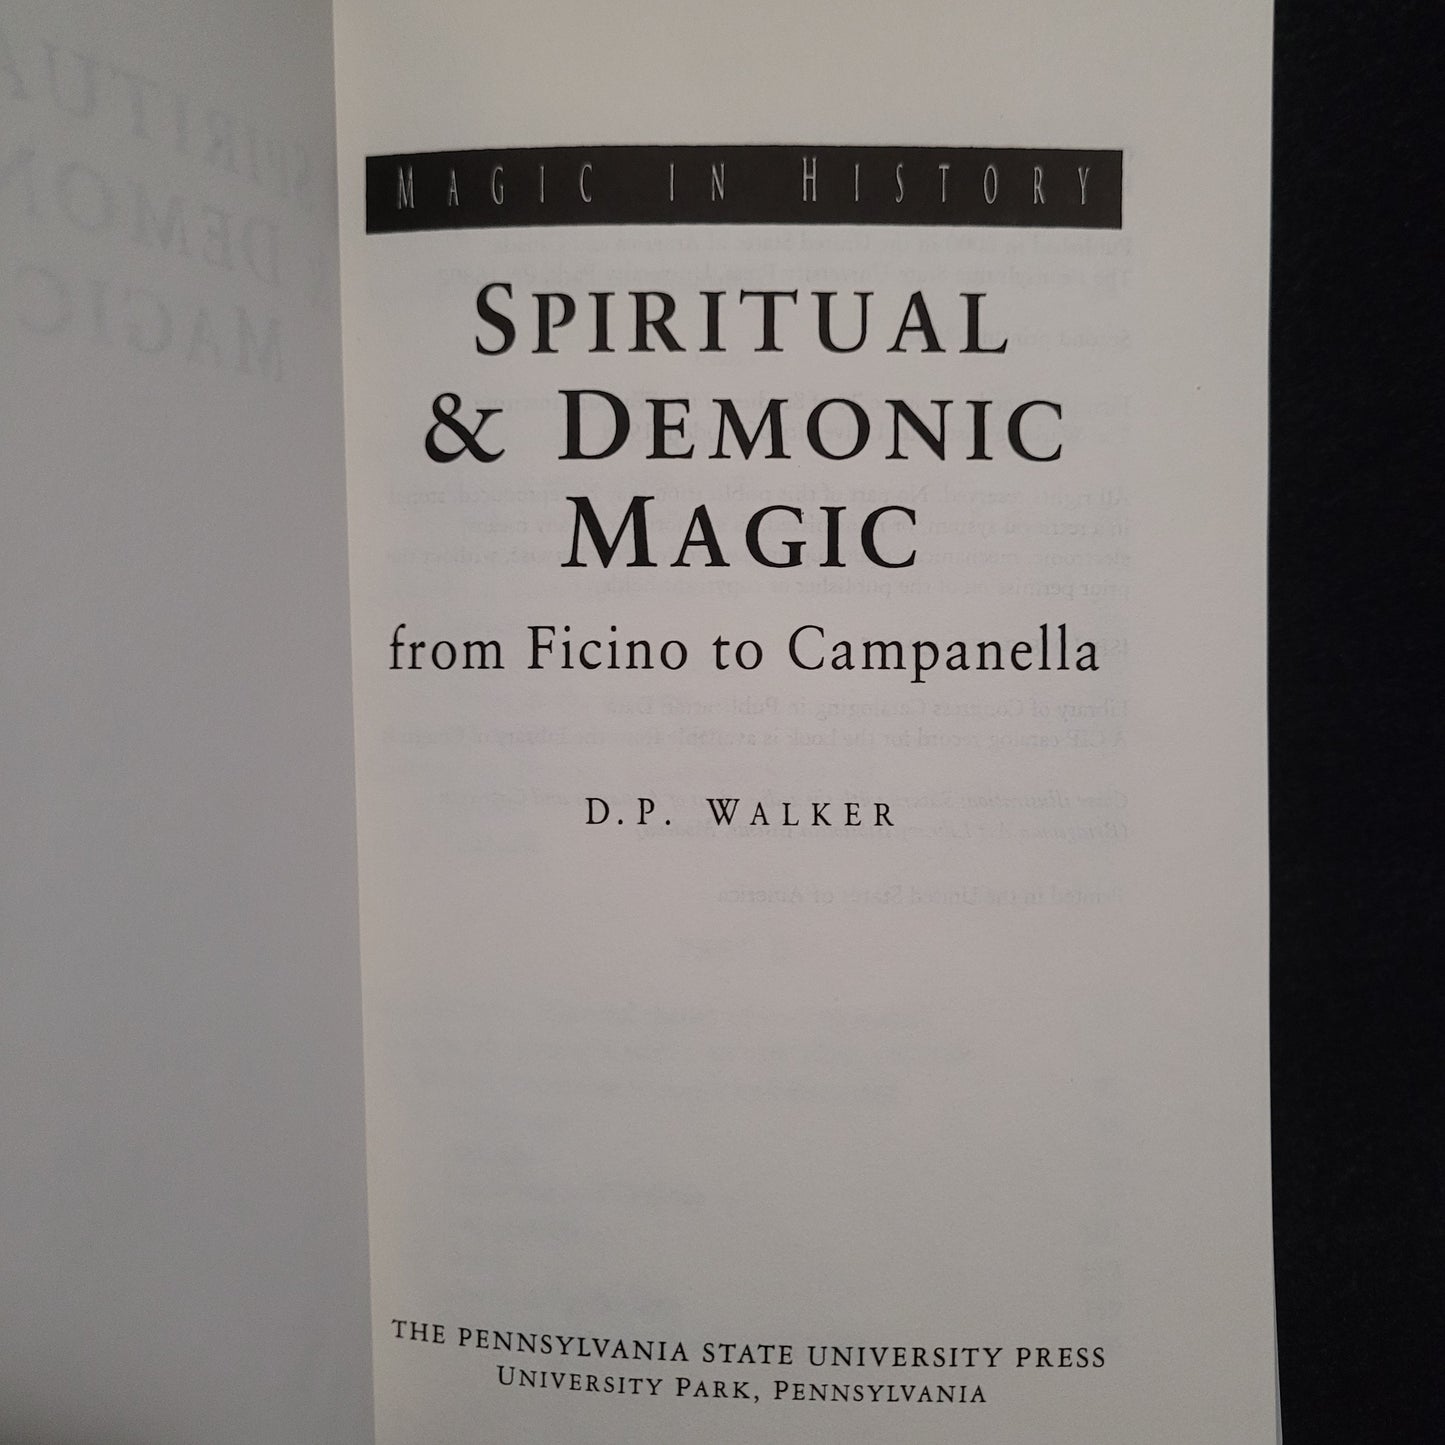 Spiritual and Demonic Magic: from Ficino to Campanella by D.P. Waker (The Pennsylvania State University Press, 2003) Paperback